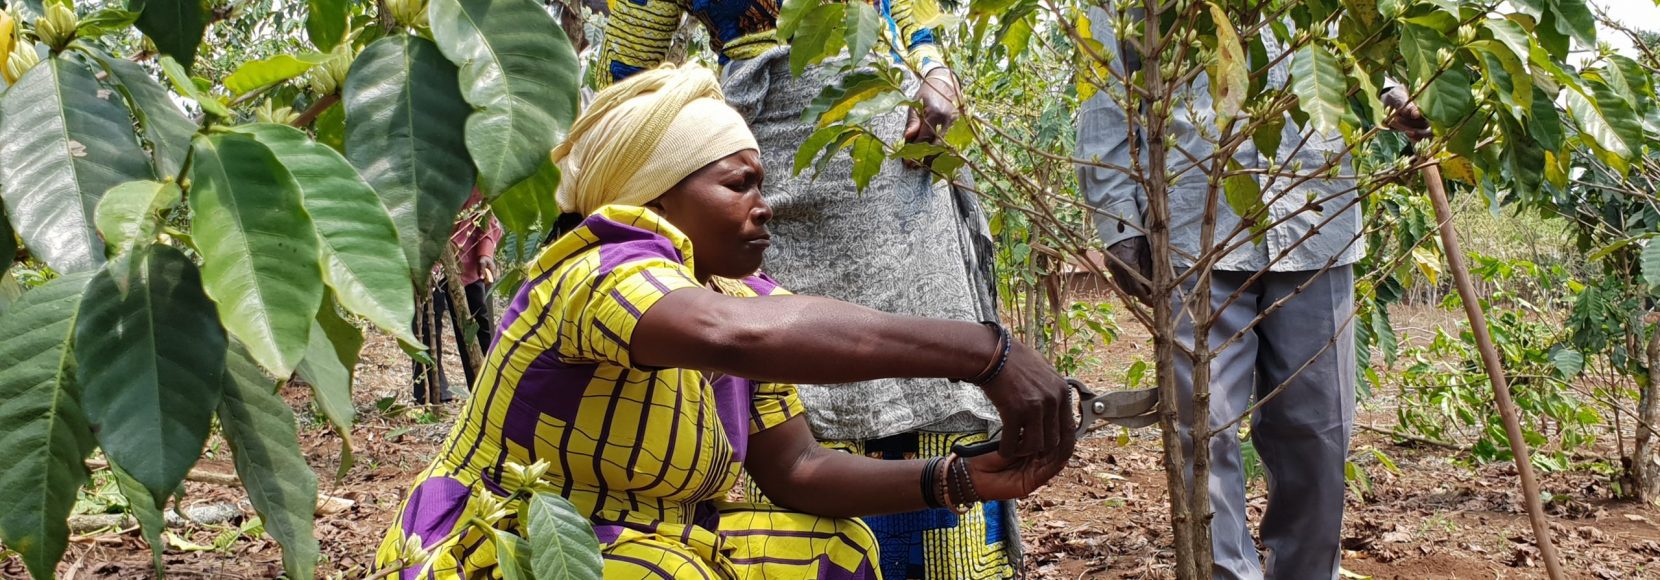 Coffee farmers in the Democratic Republic of Congo tend to their coffee trees